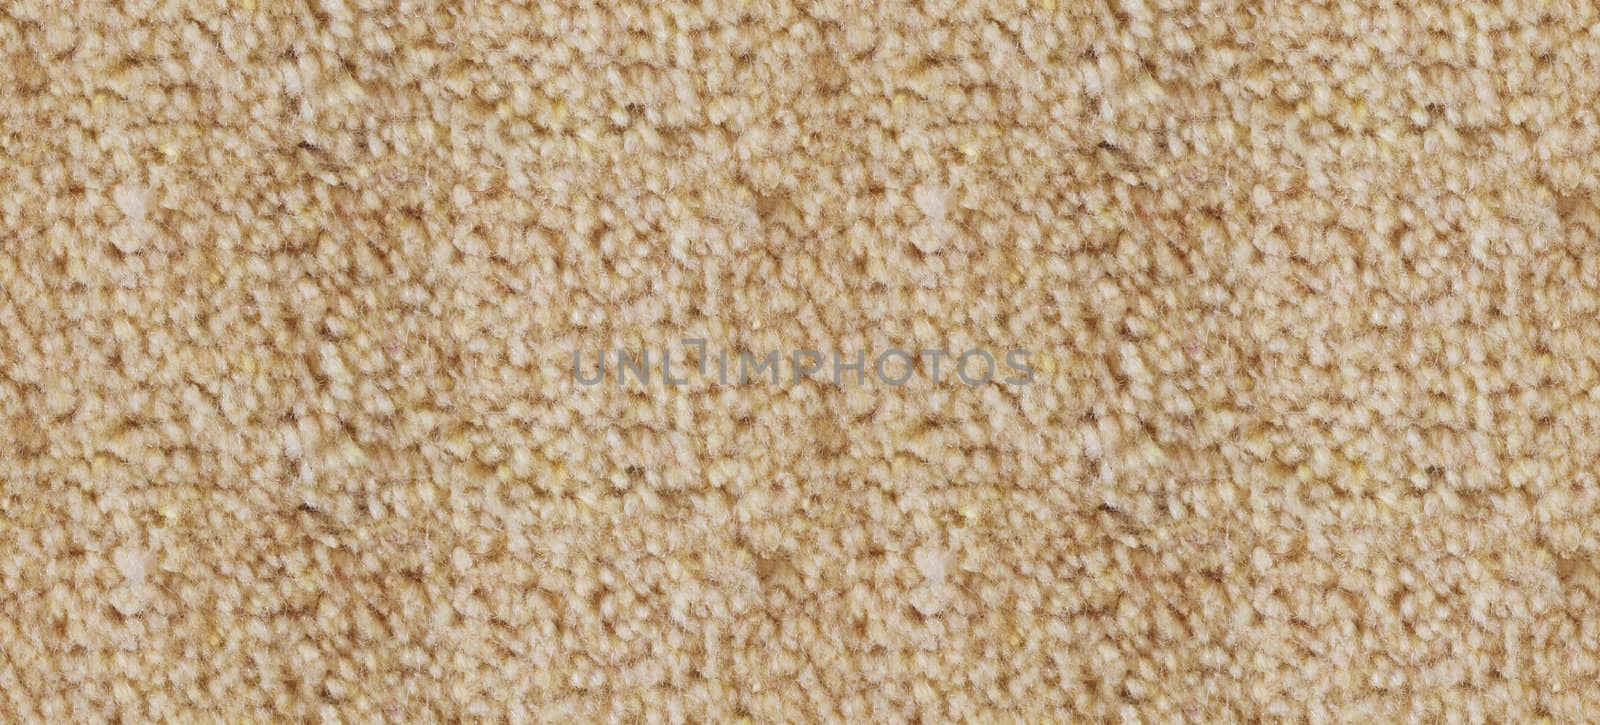 Seamless pattern(texture) of woollen carpet by nwp